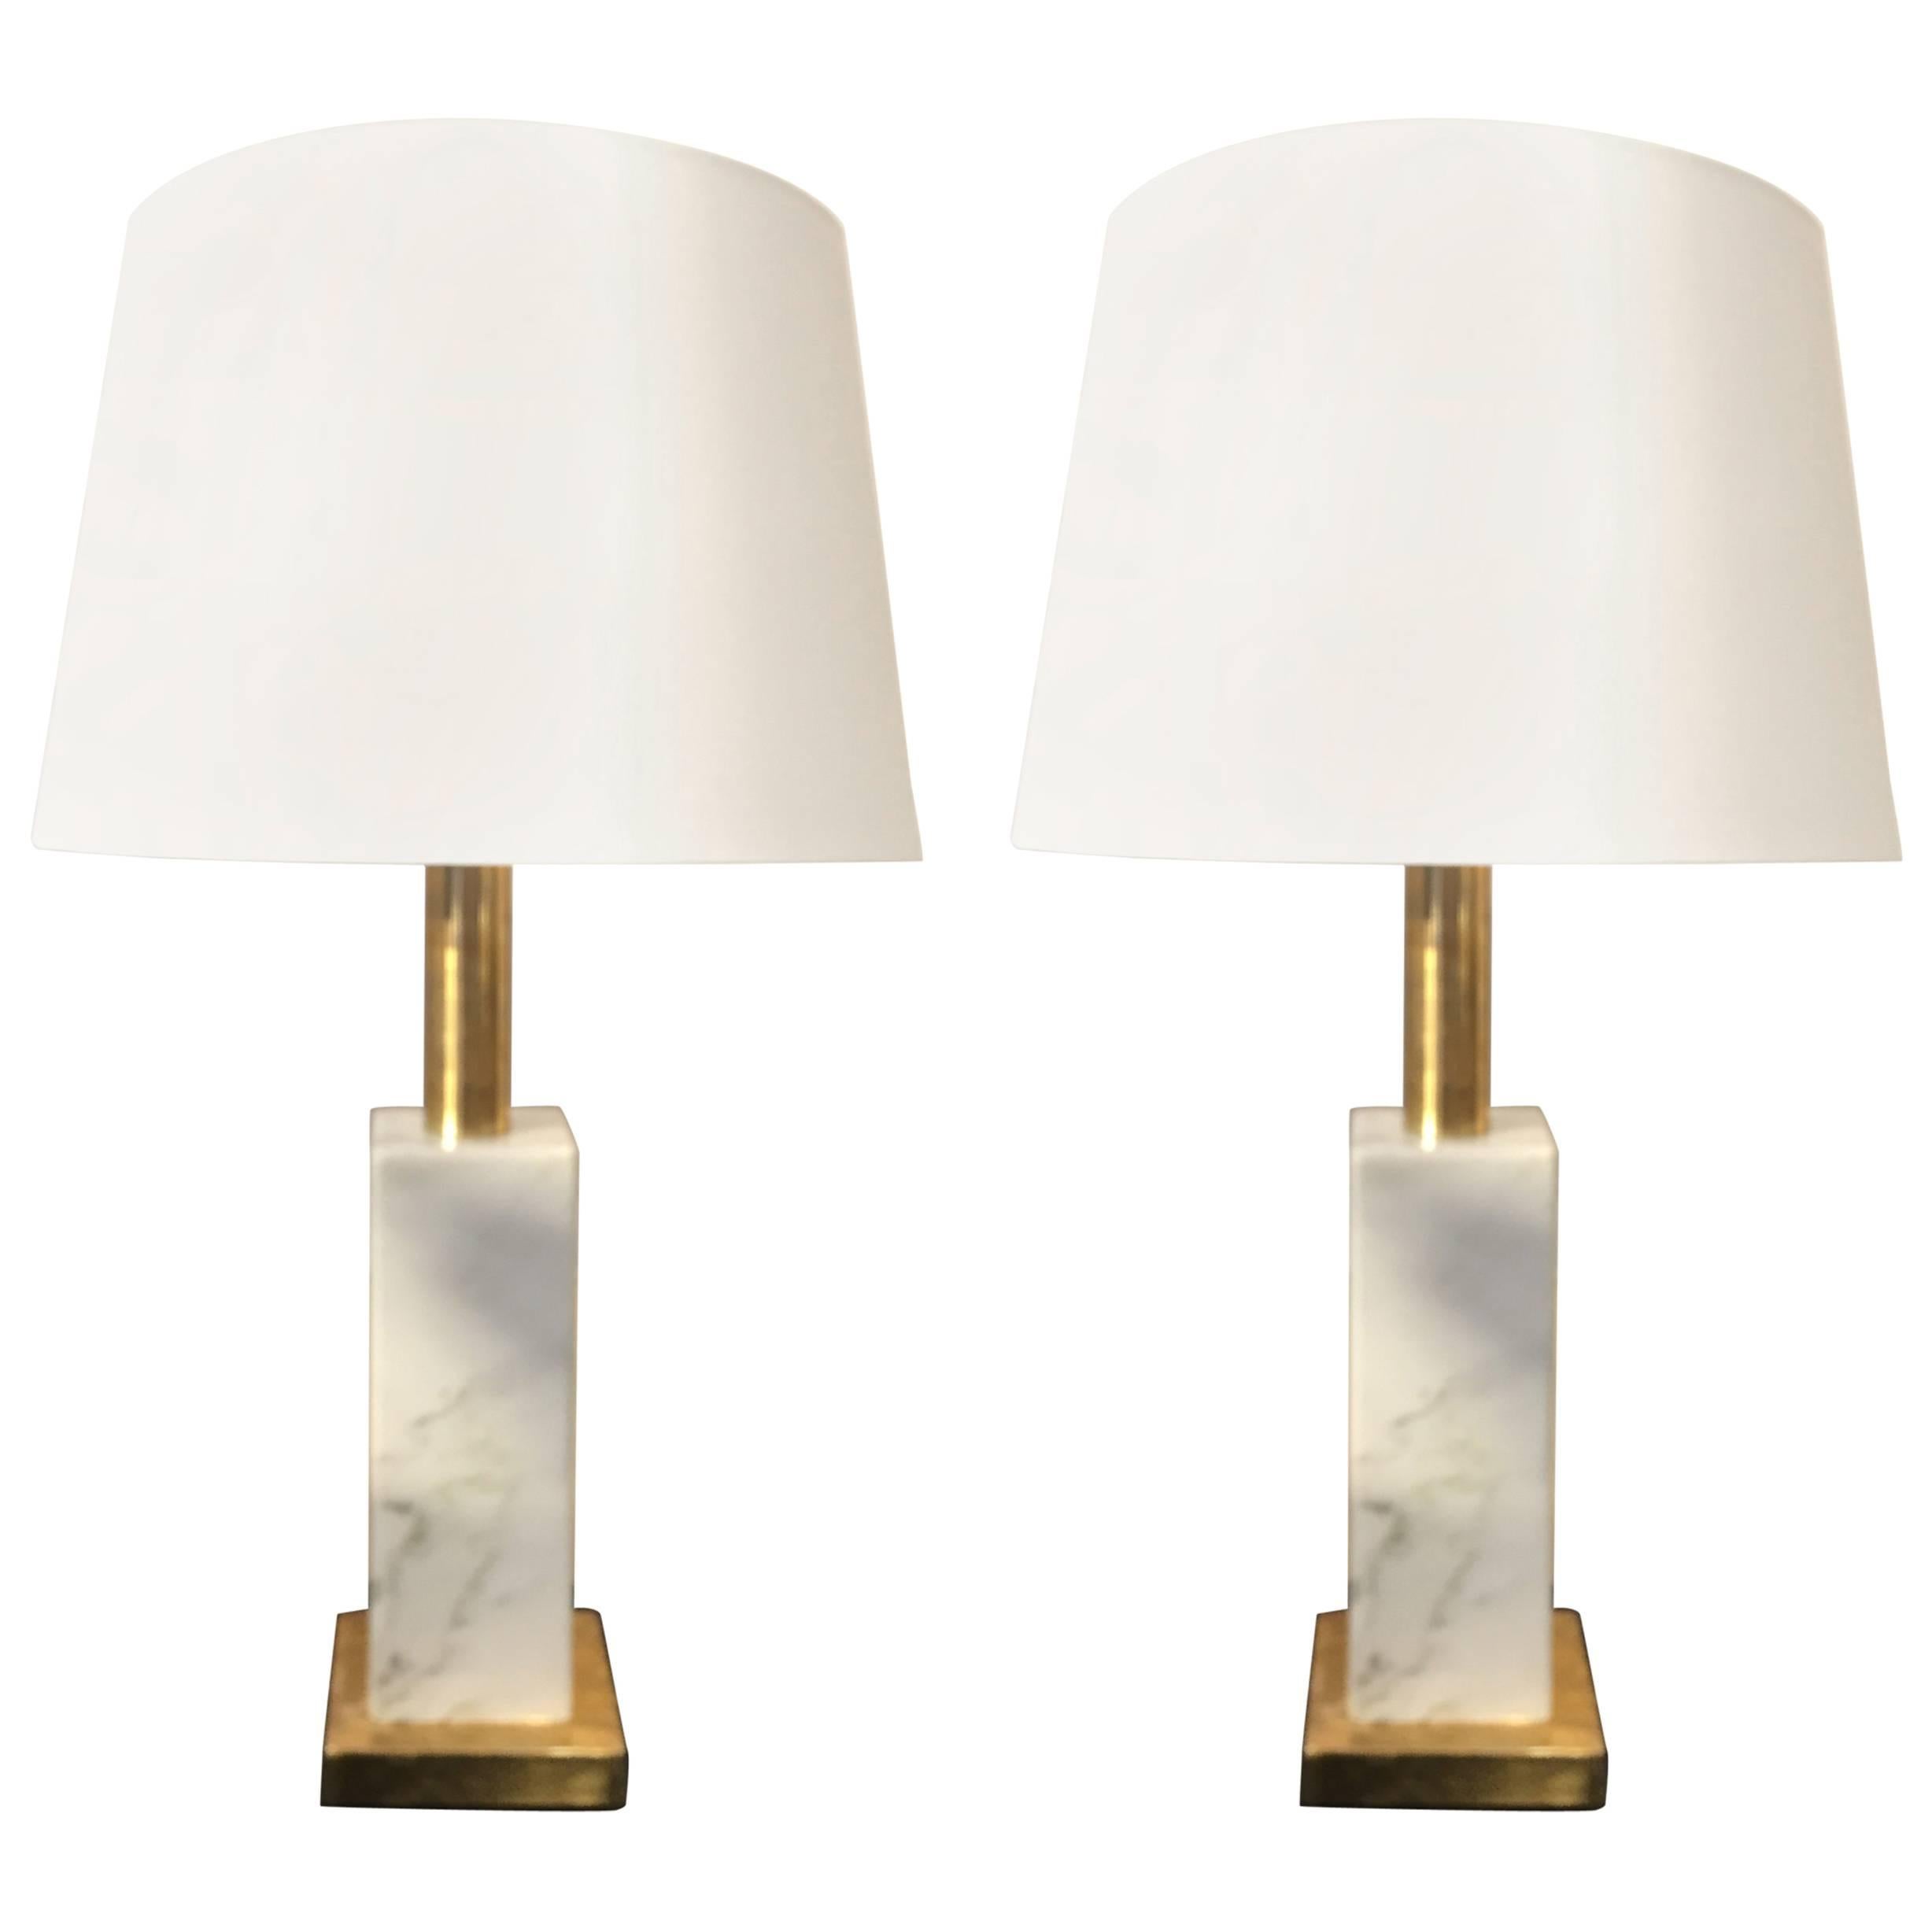 Carrara White Marble and Brass Italian Table Lamps, 1960s